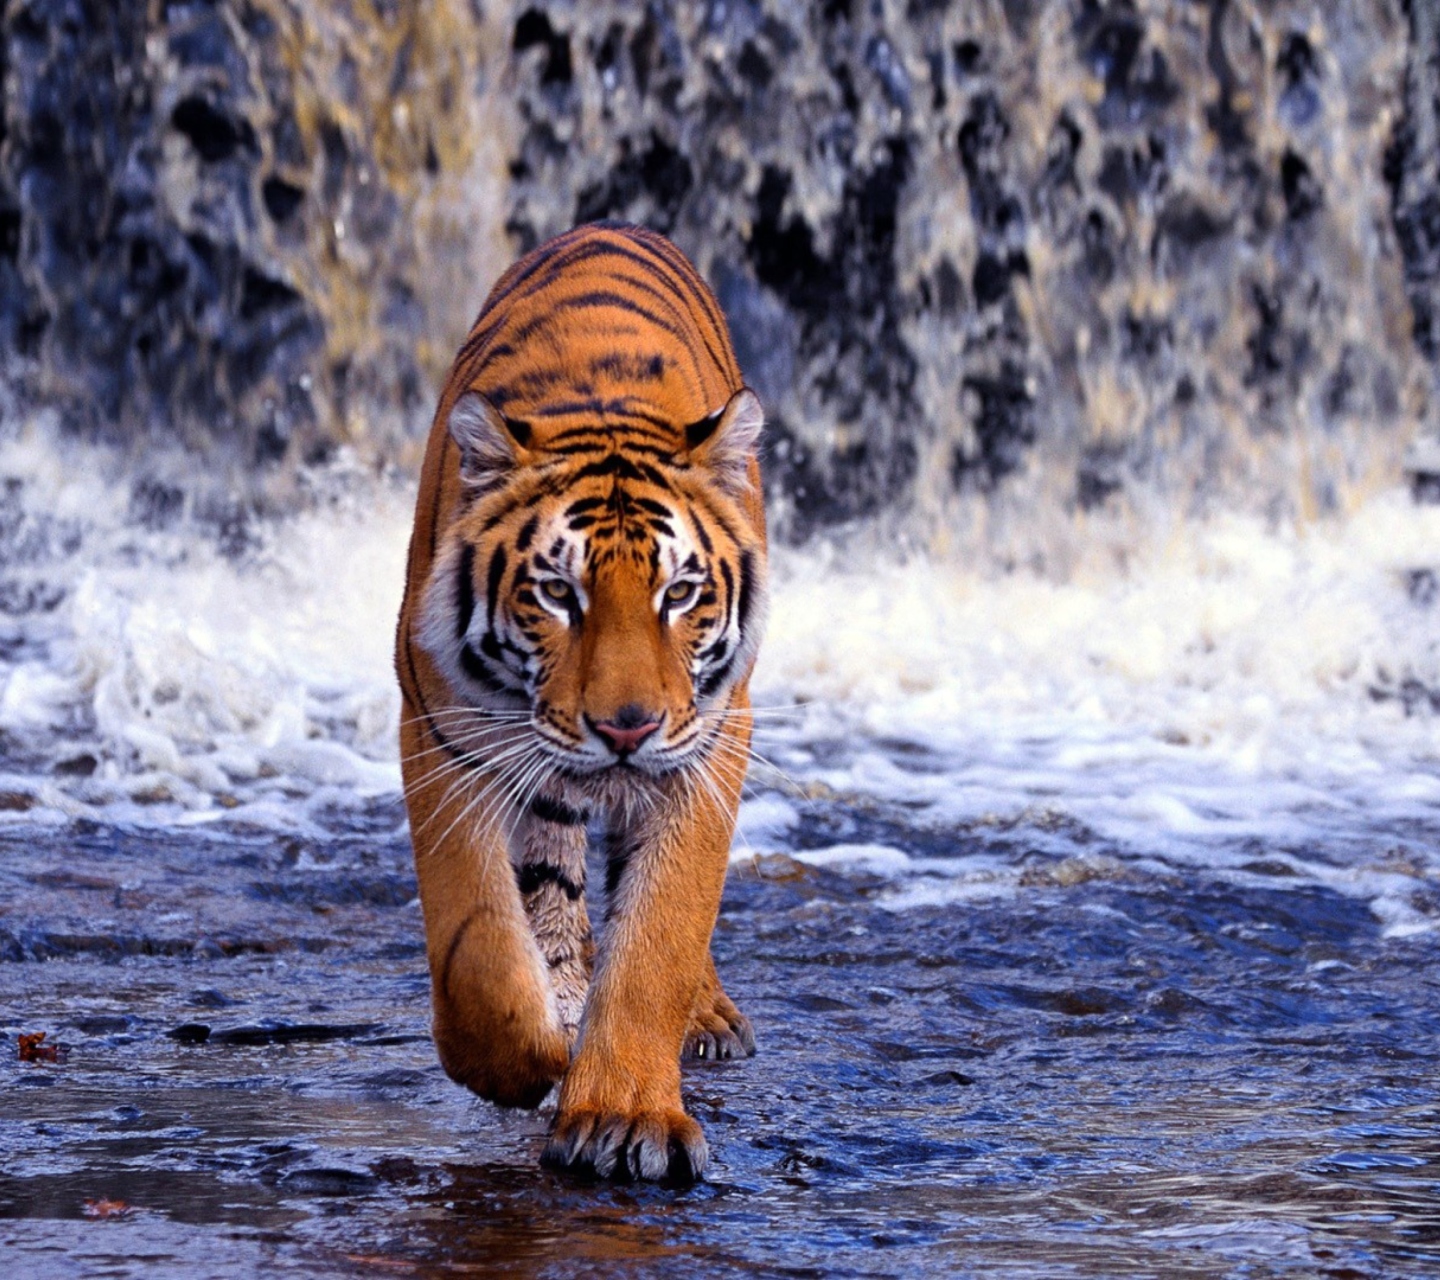 Tiger And Waterfall wallpaper 1440x1280